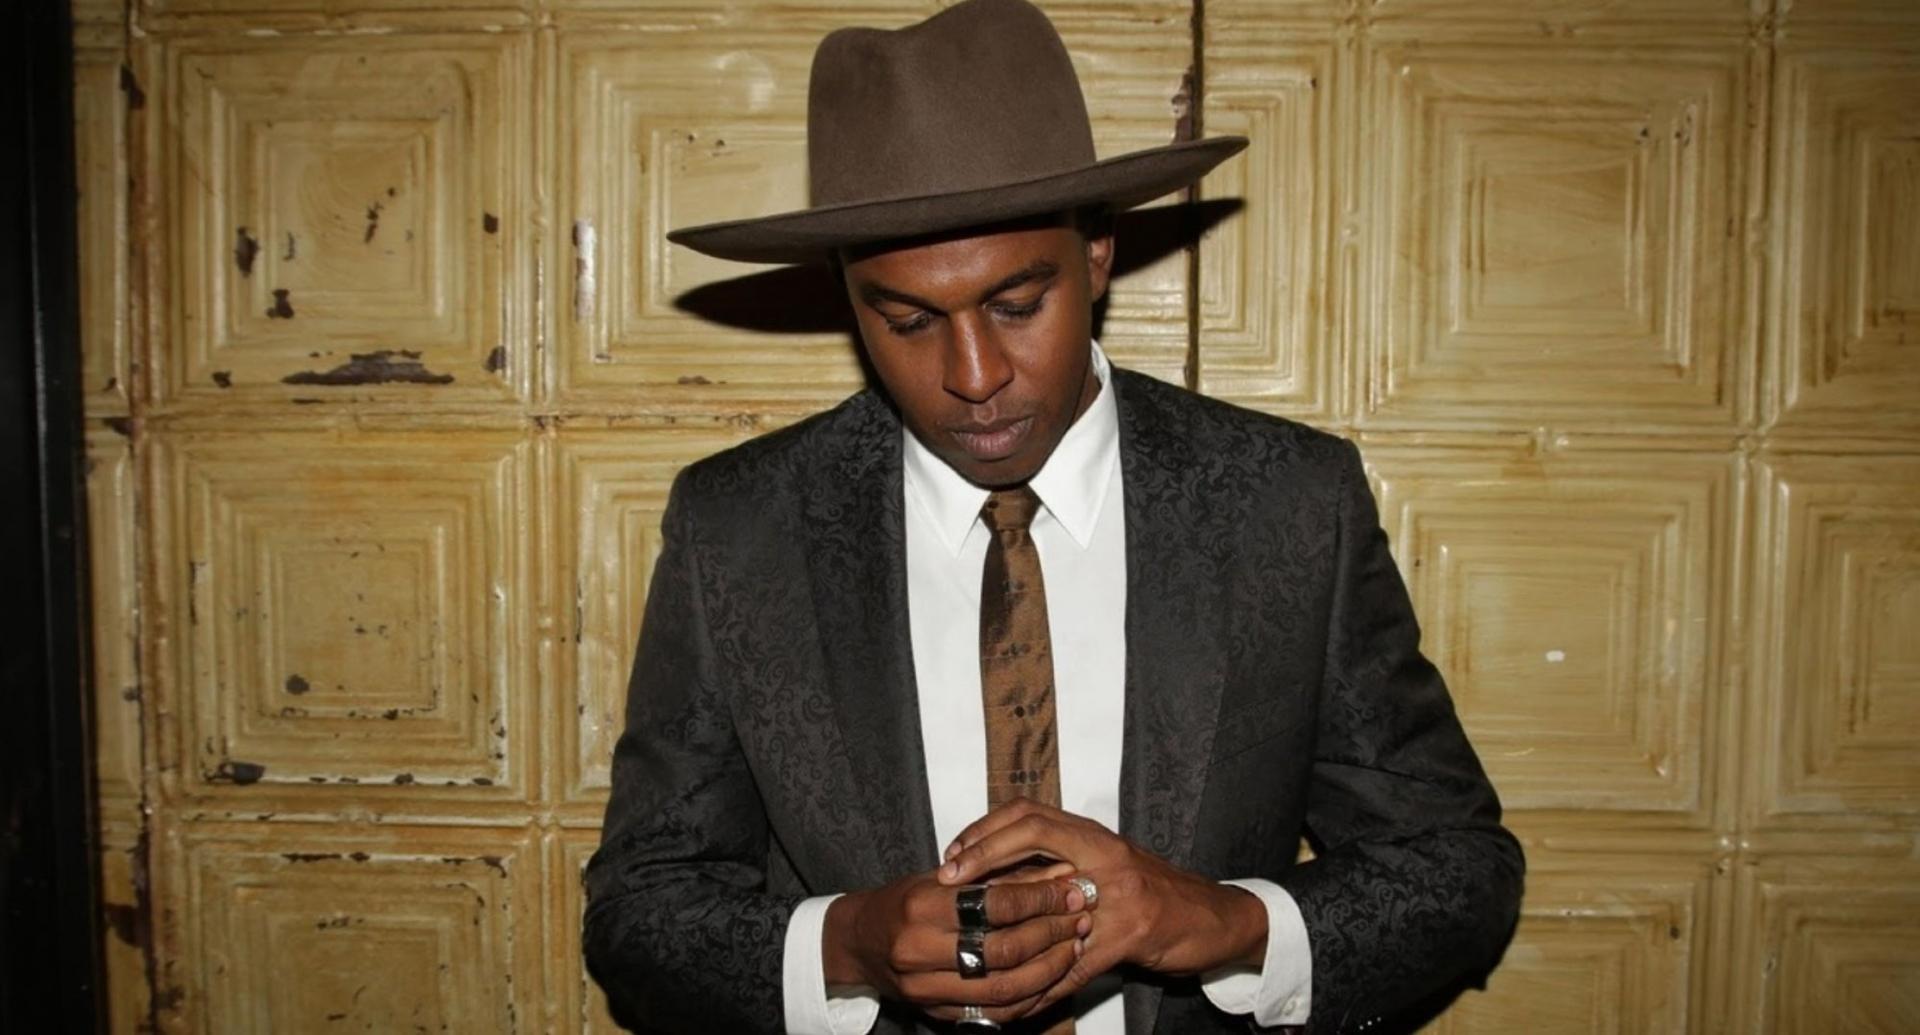 Sinkane is shown wearing a suit and wide-brimmed hat.